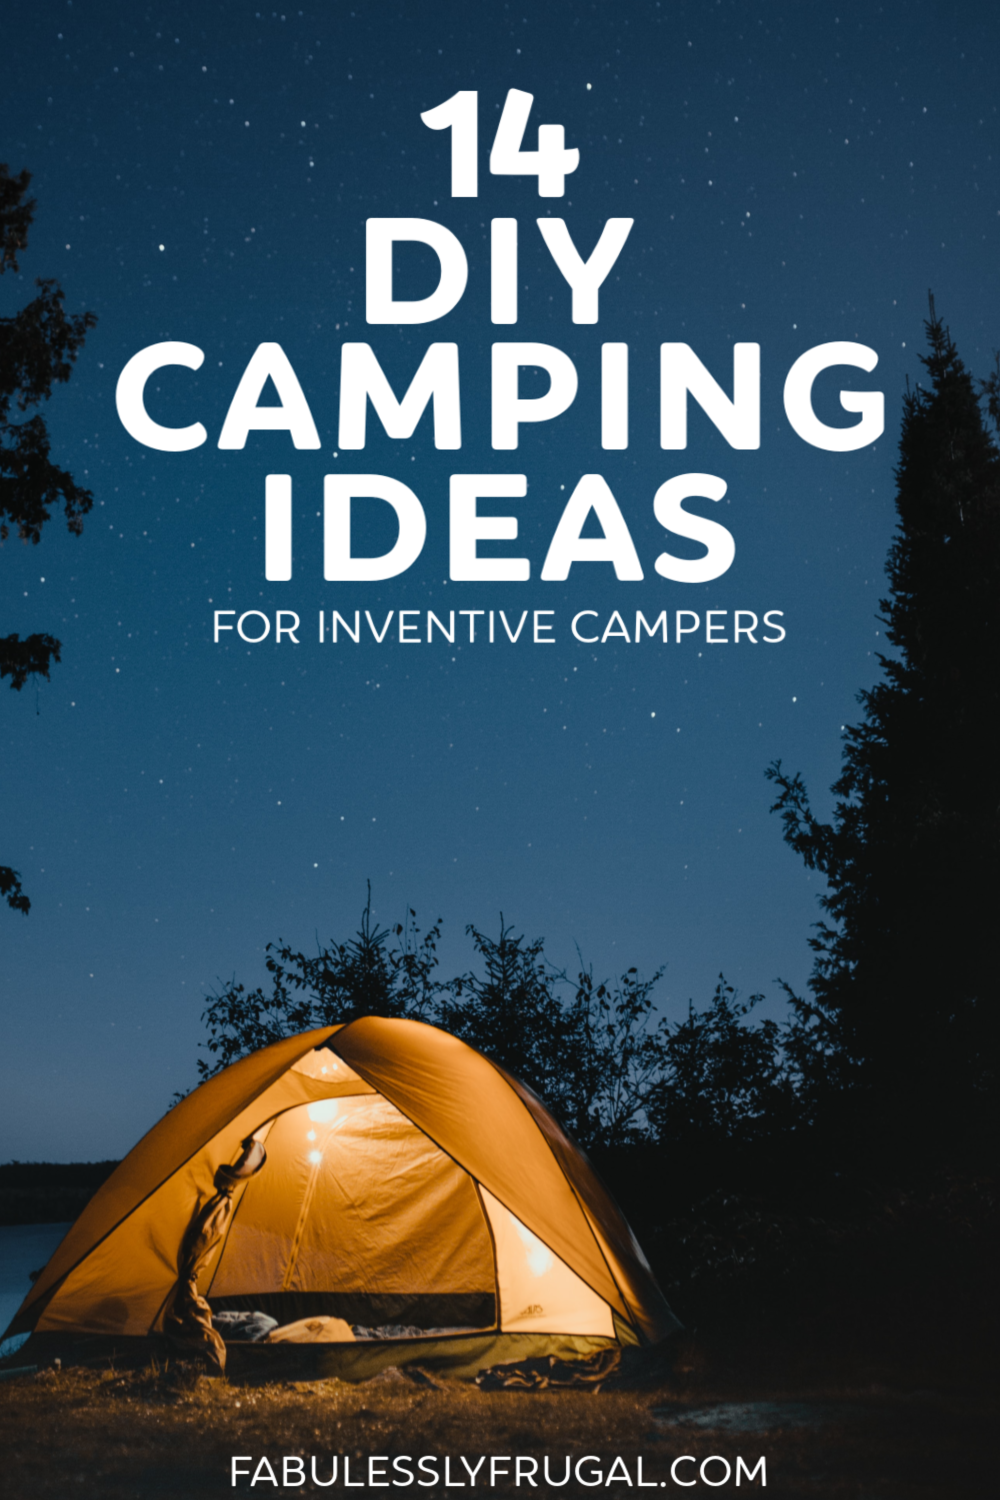 DIY camping ideas for inventive campers